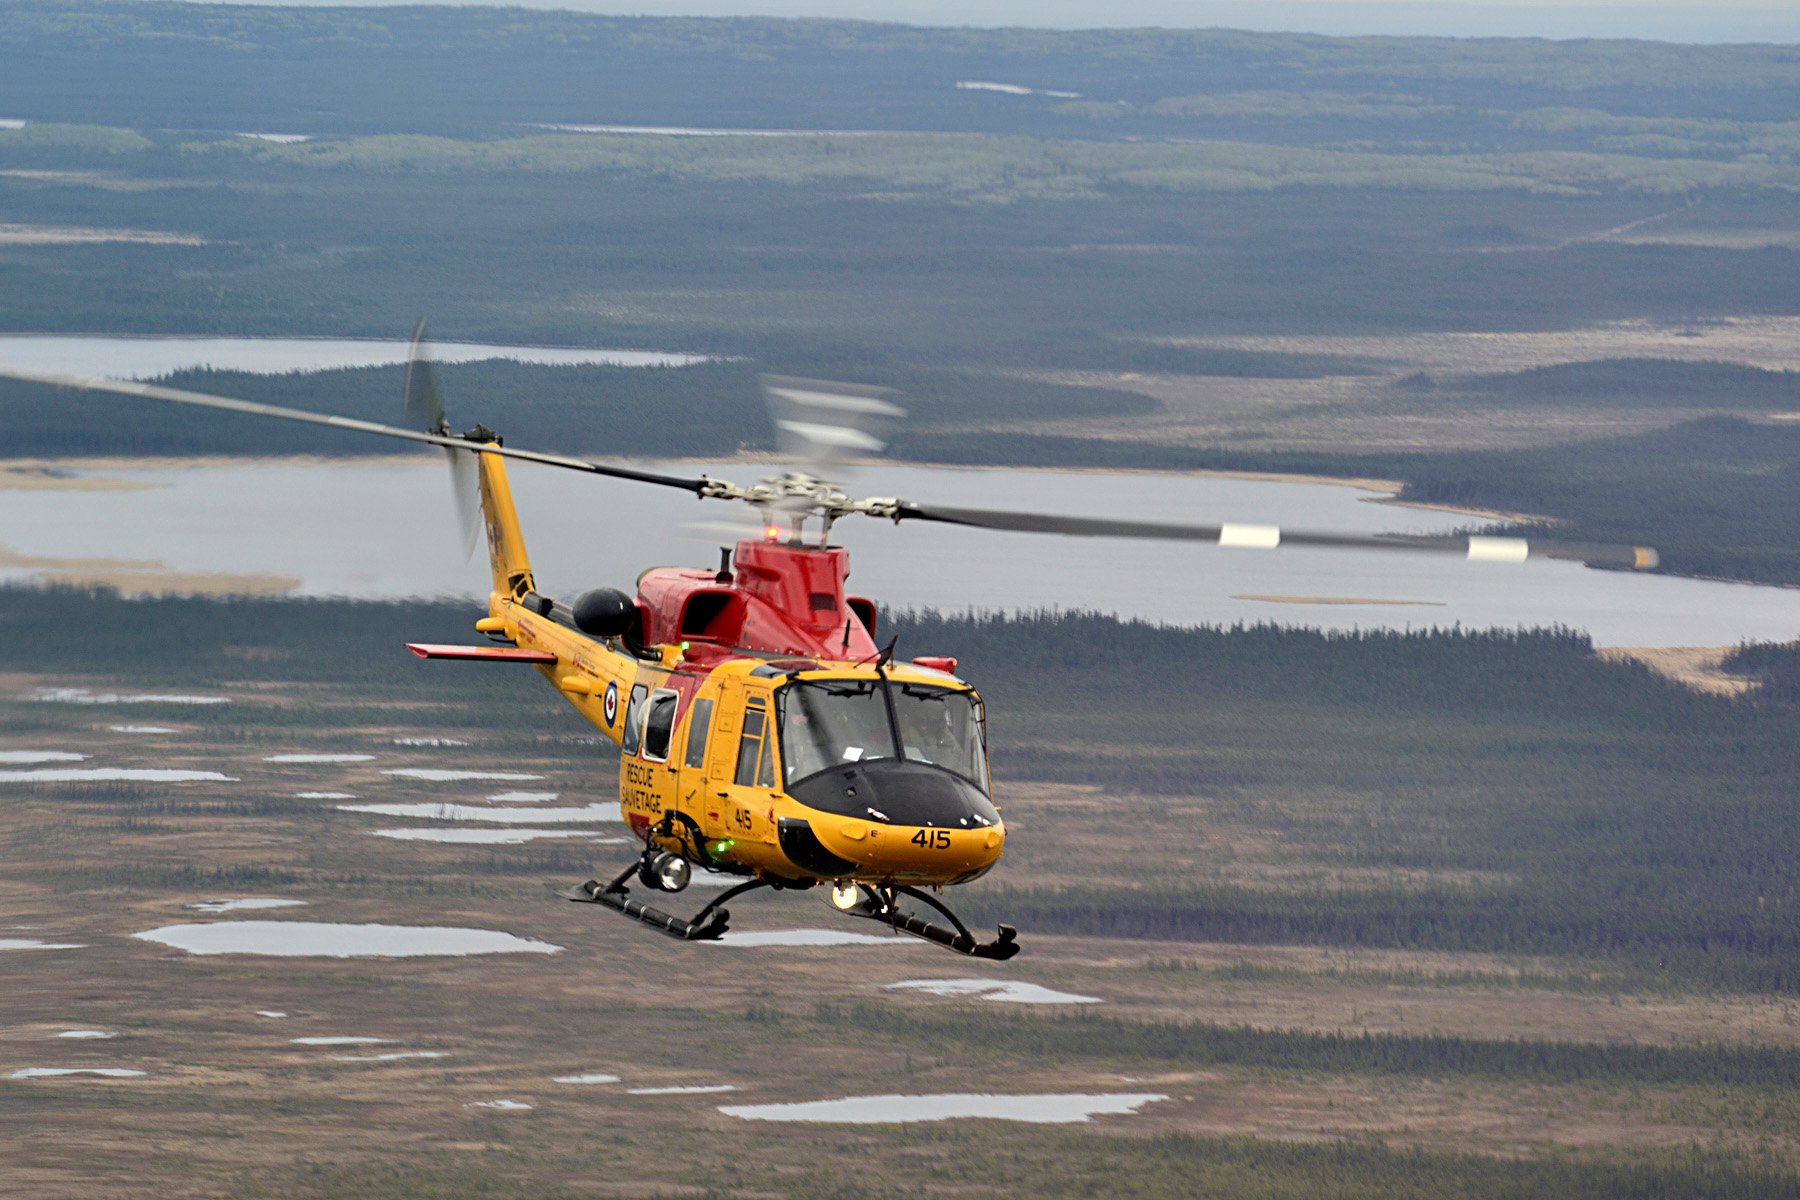 A CH-146 Griffon helicopter from 417 Search and Rescue Squadron based in Cold Lake, Alberta conducts operations over northern Alberta while providing assistance to the province during wildfires near Fort McMurray on May 9, 2016. Photo: MCpl Brandon O'Connell, 3 CDN DIV PA